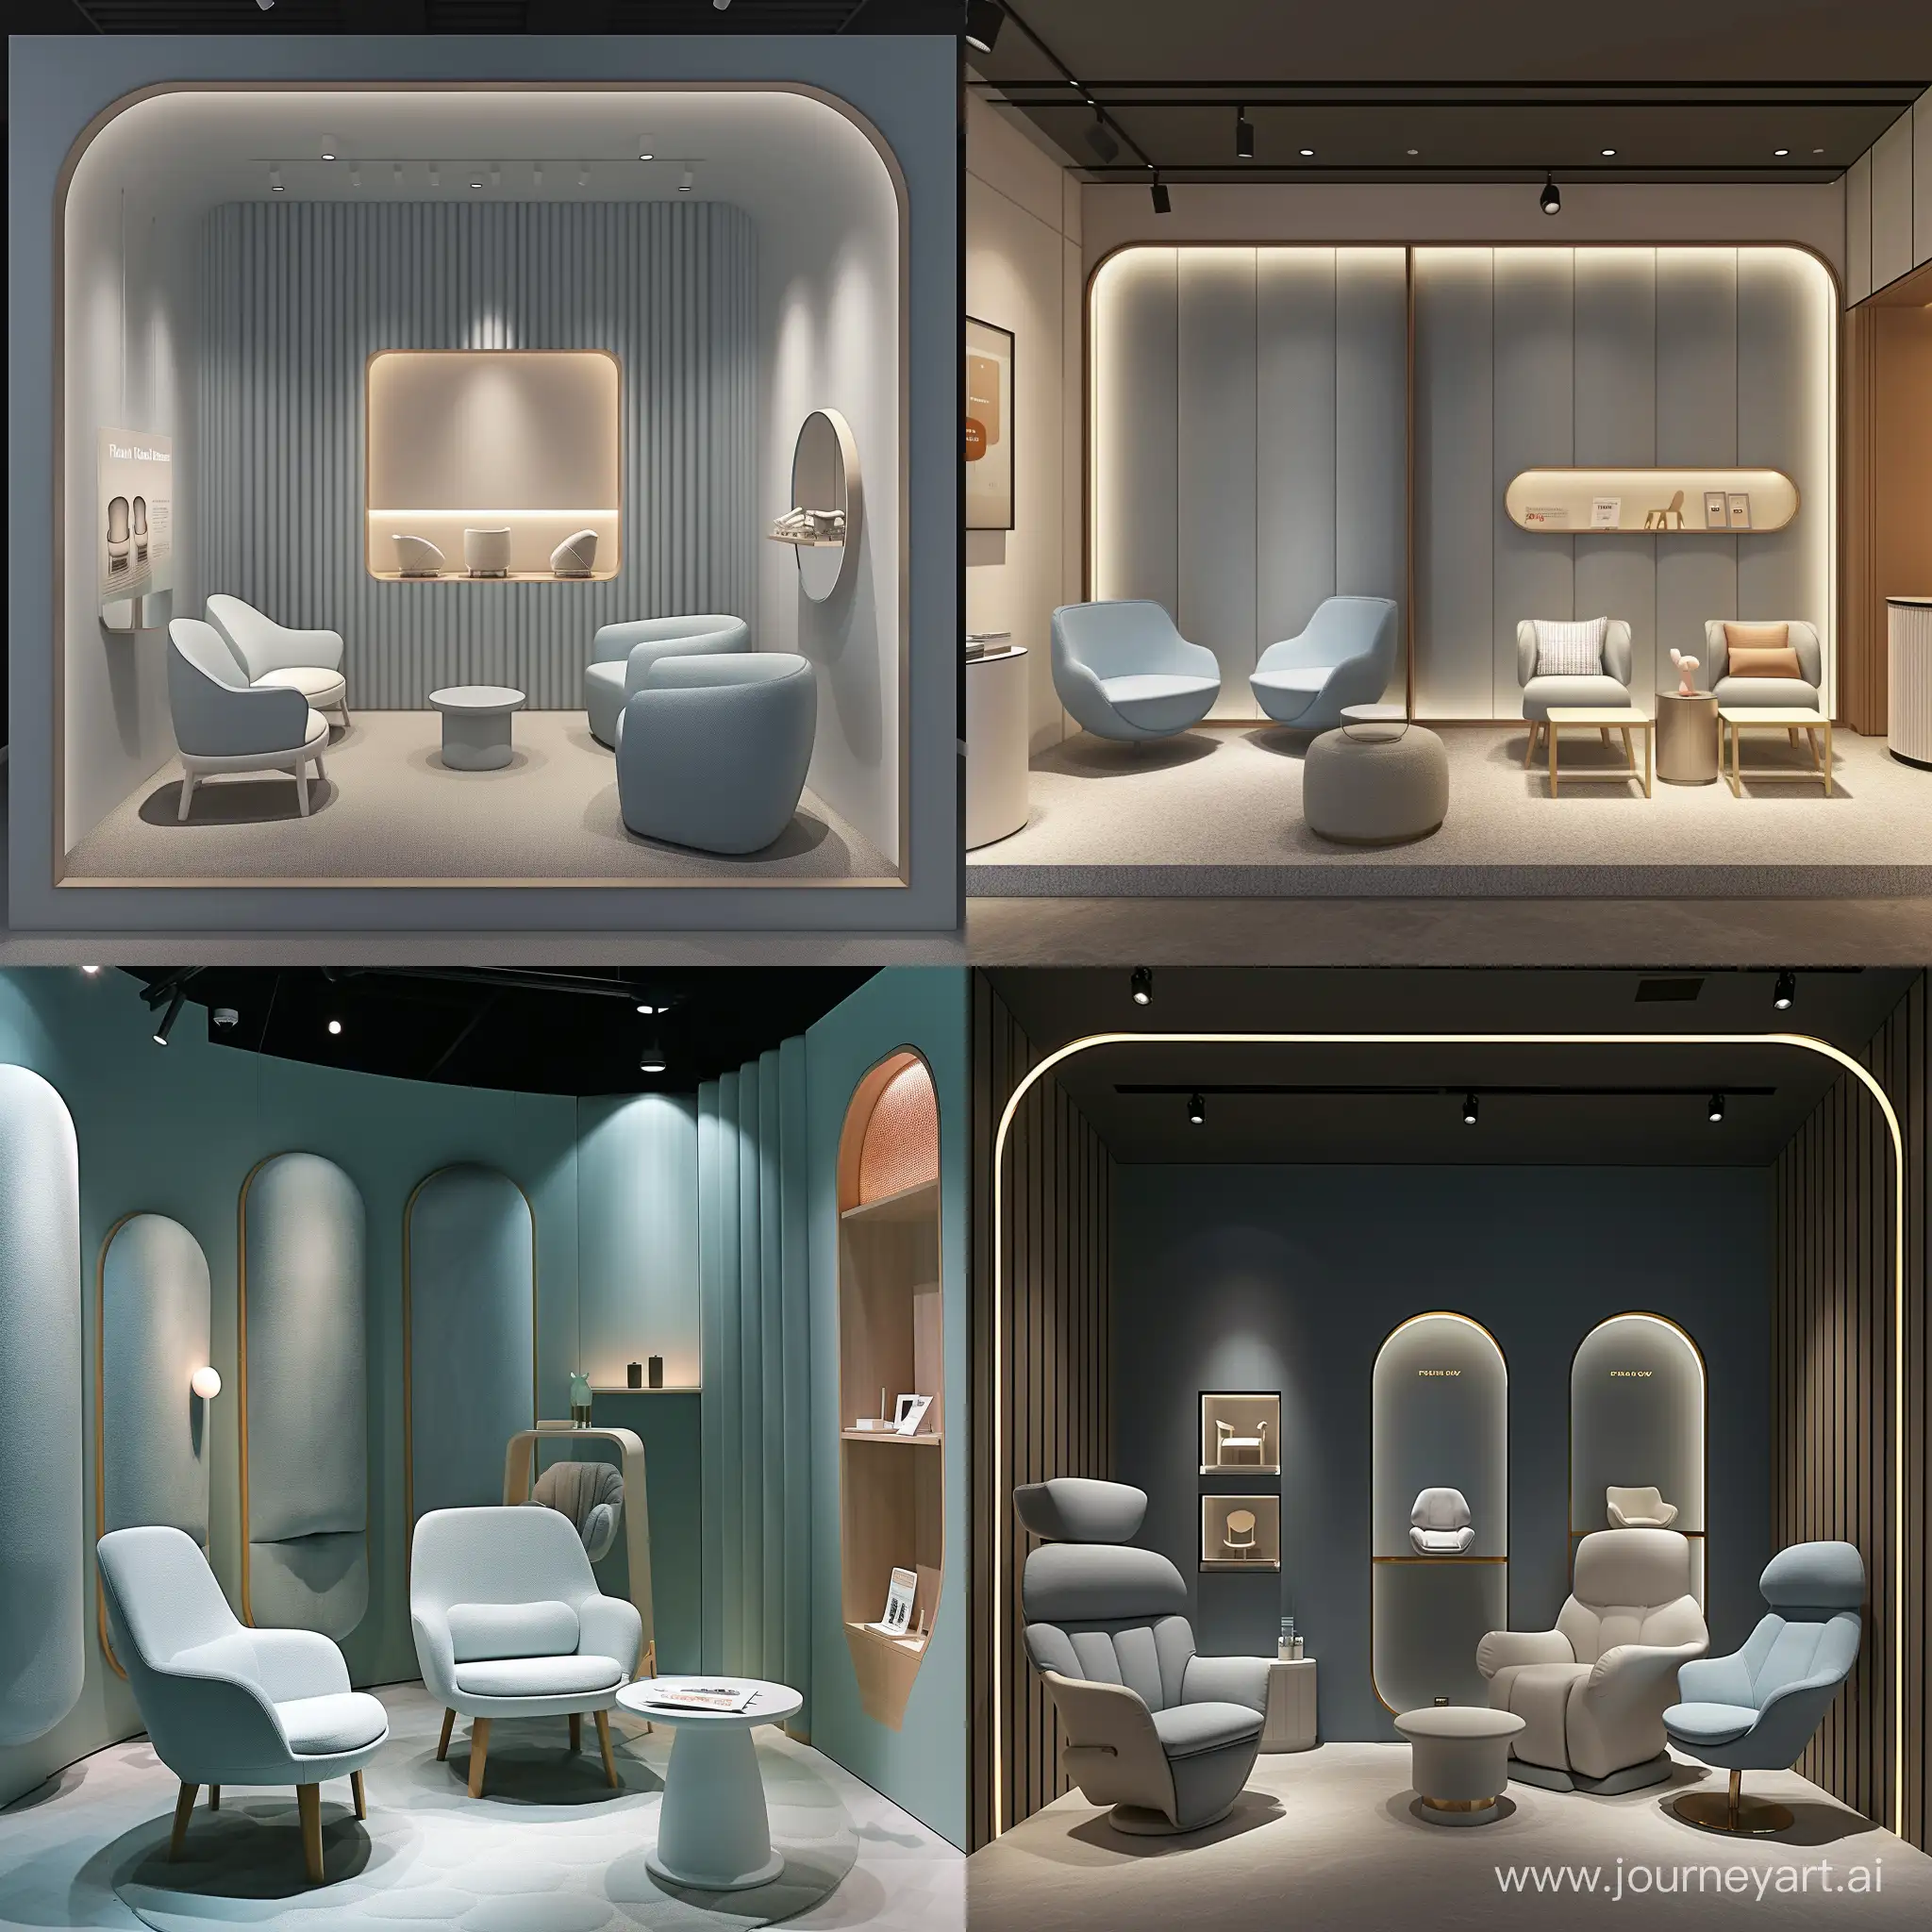 imagine an image of Private Viewing Room (Approx. 6.75 sqm) of kids chair showroom:
Color and Material: Calming colors like soft blues or greys; luxurious, sustainable materials for furniture; sound-absorbing wall panels.
Items and Elements: Comfortable seating; a display area for private viewing of chairs; perhaps a small table for discussions.
Graphic Features: Subtle branding; possibly a display or artwork that reflects the brand's ethos.
Lighting: Adjustable lighting, ranging from soft ambient to bright focus lighting for chair examination.realistic style